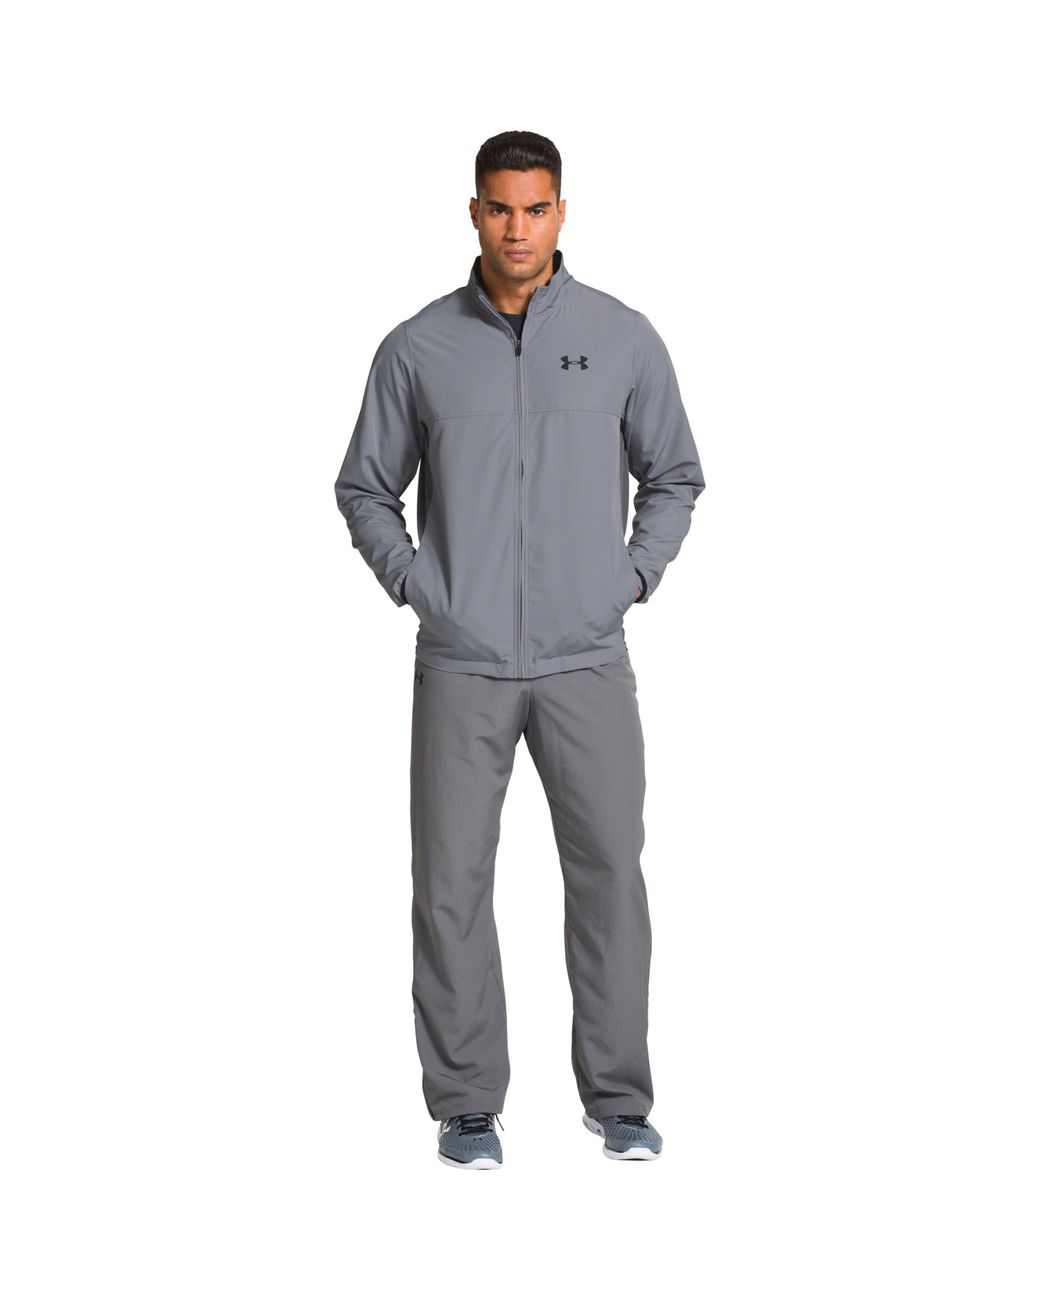  Under Armour Command Mens Warm up Pants S Black-White :  Clothing, Shoes & Jewelry